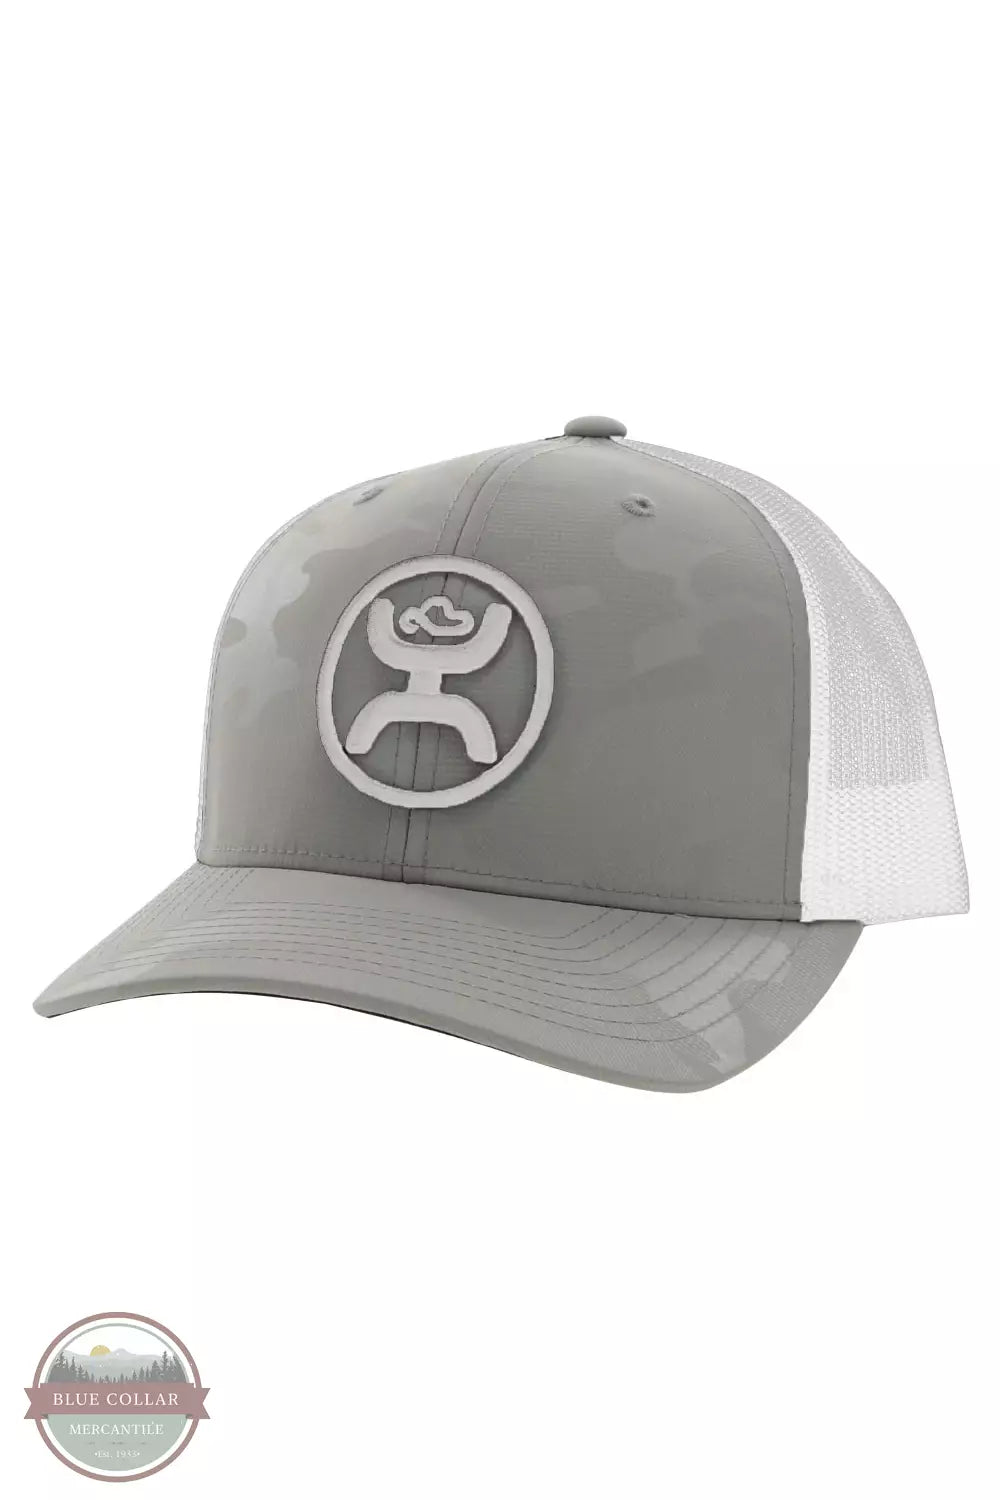 Hooey 2309T O Classic Cap with Logo Grey Camo / White Front View